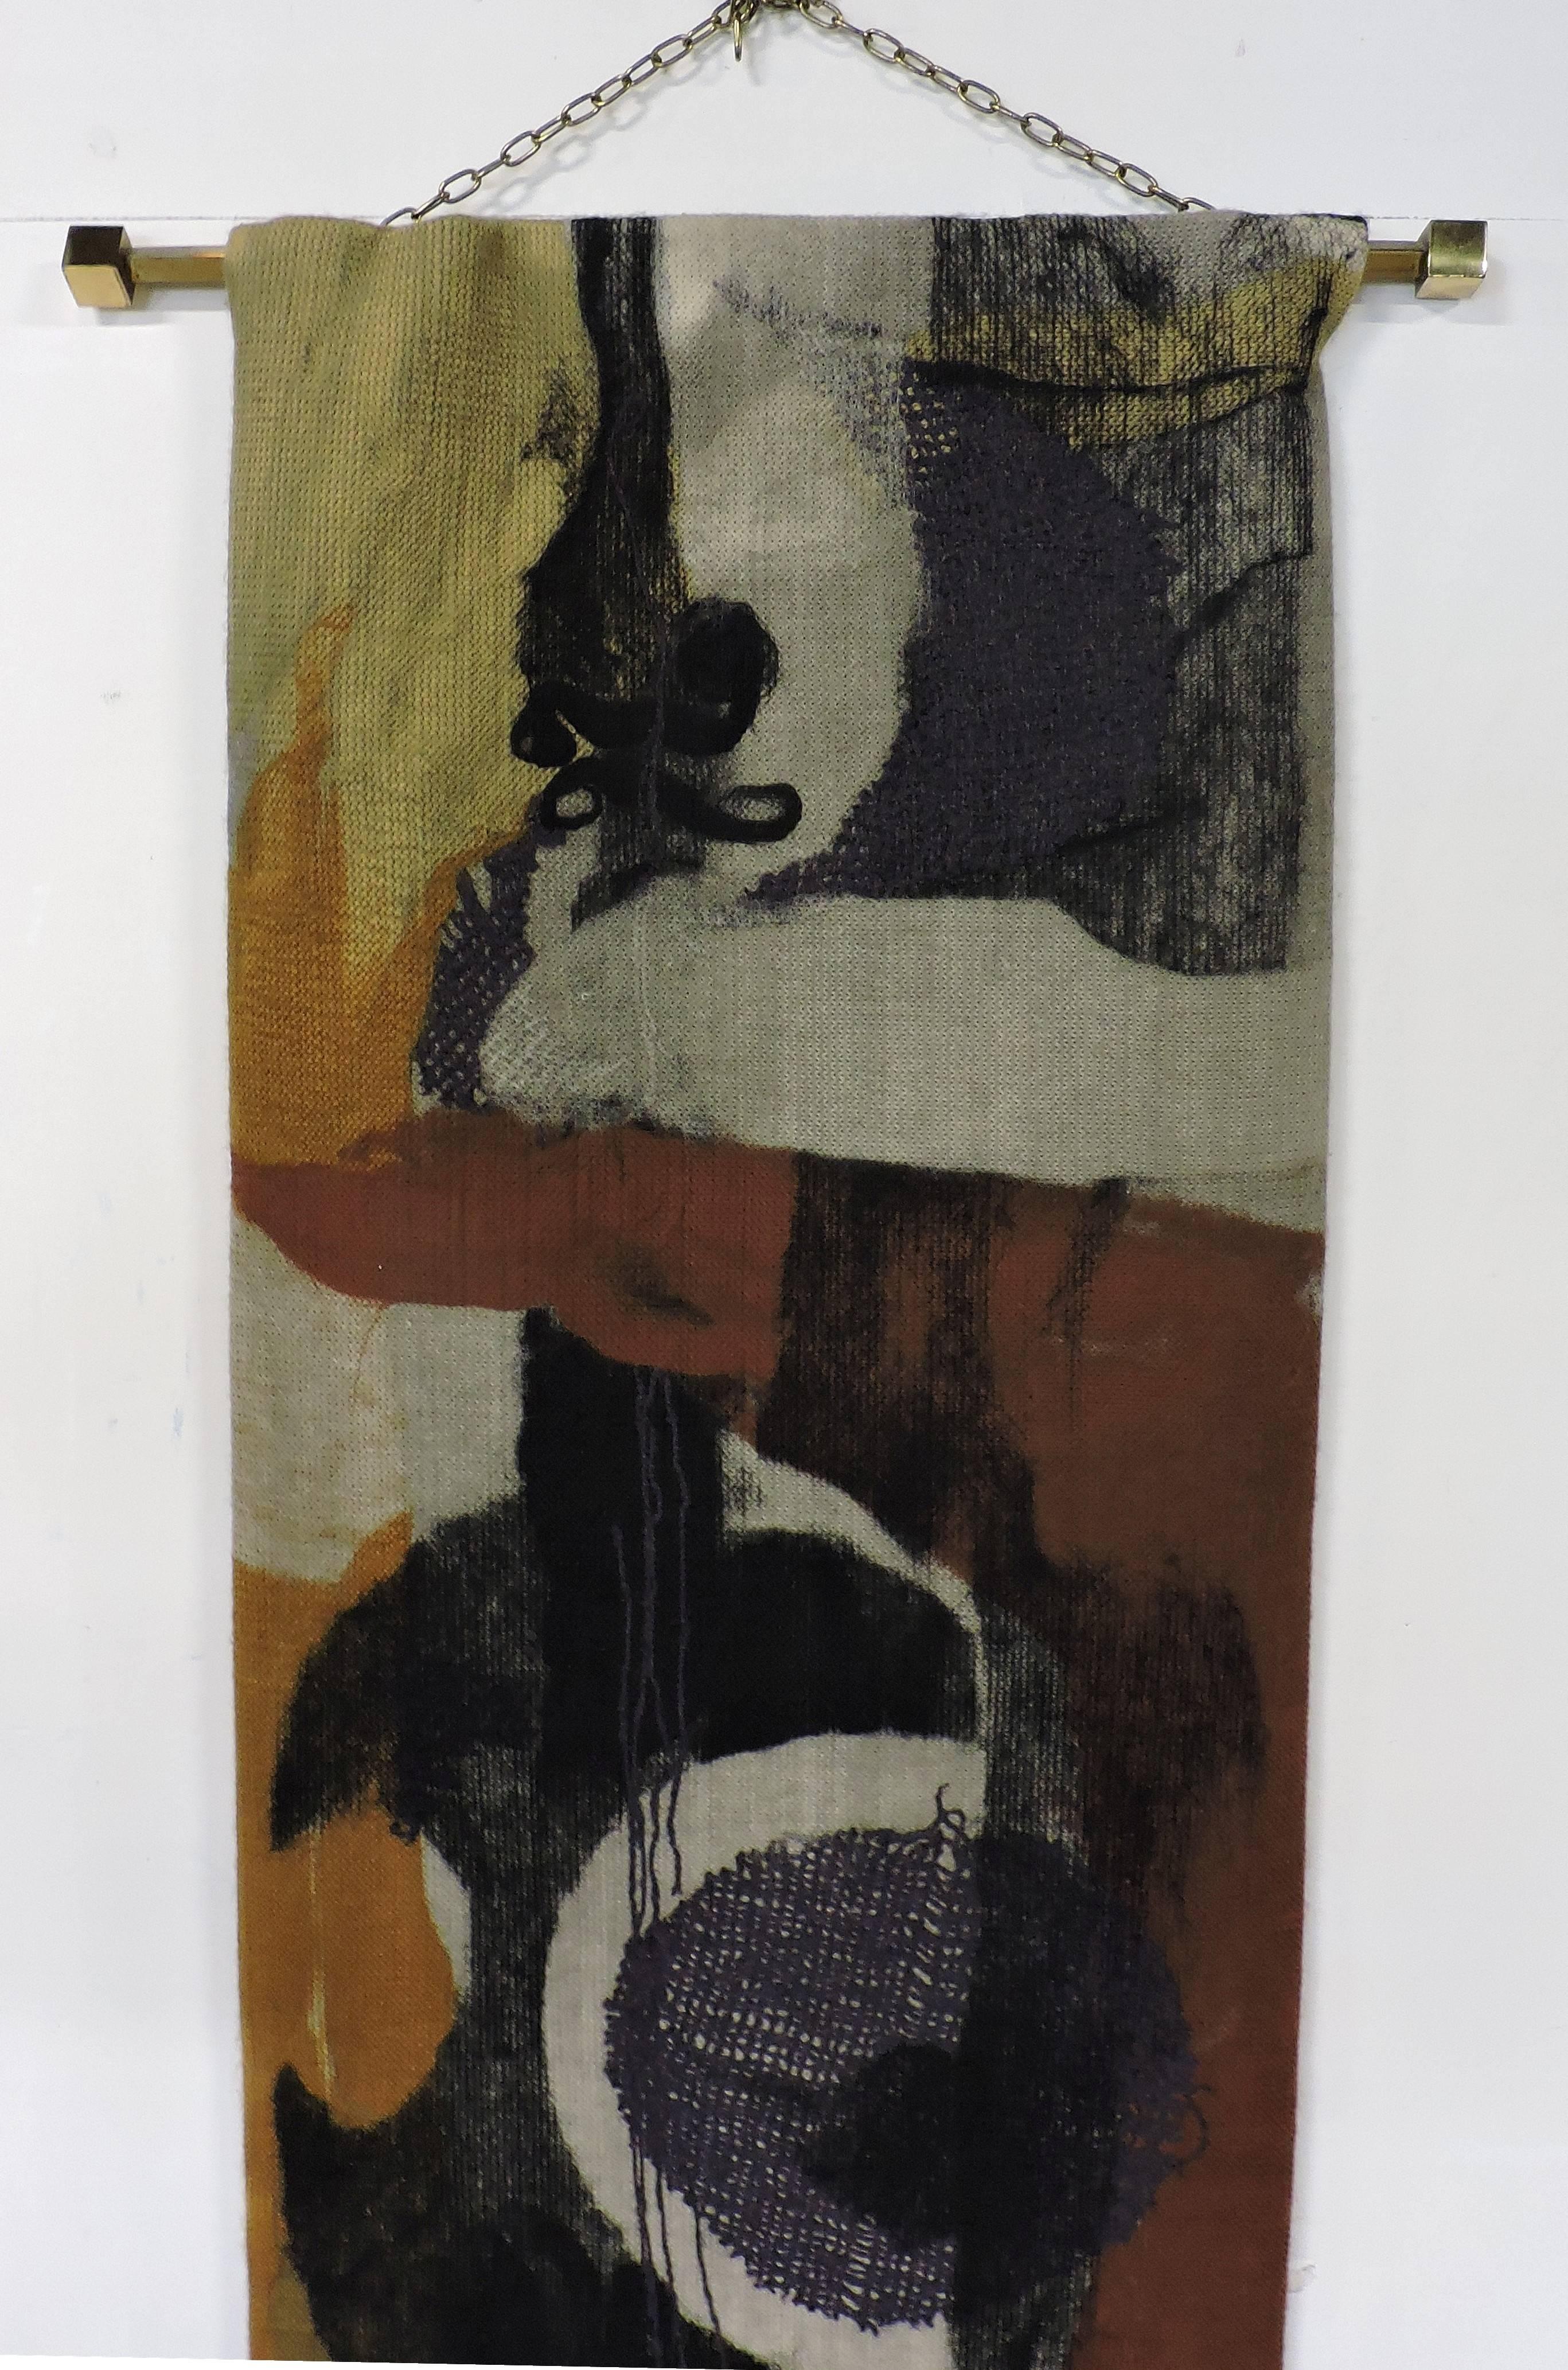 Wonderful modern handwoven abstract textile art by Czech artist Zoia Kasprikova. This tapestry is composed of muted tones of orange, brown and grey. Label on verso from Art Protis, and signed by artist. There is a brass rod and chain for hanging.